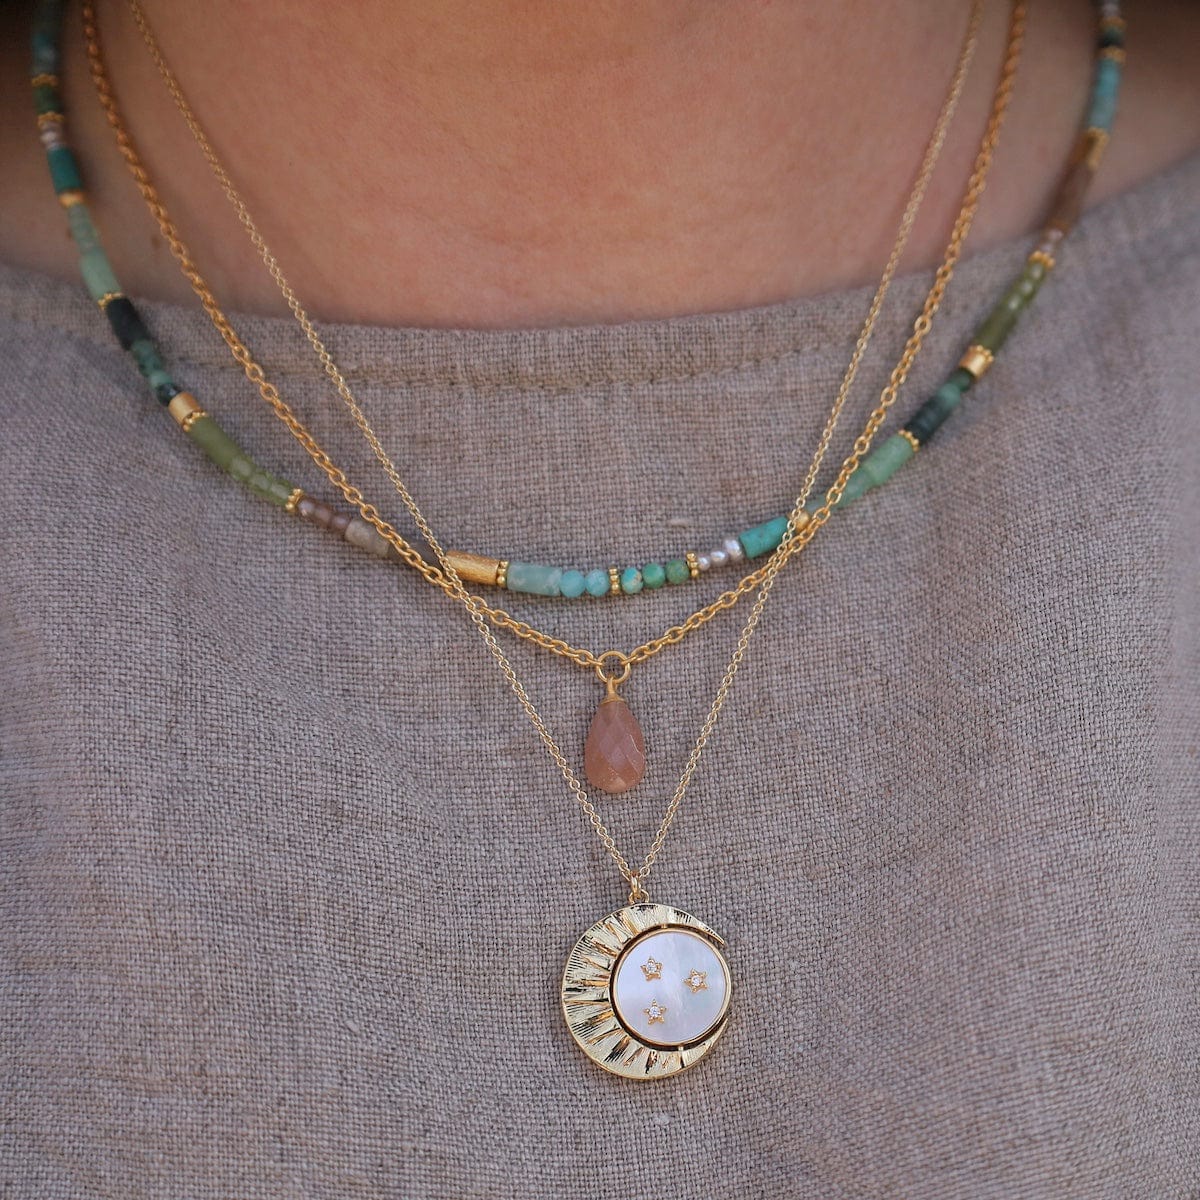 NKL-VRM Green Stone Mix Necklace